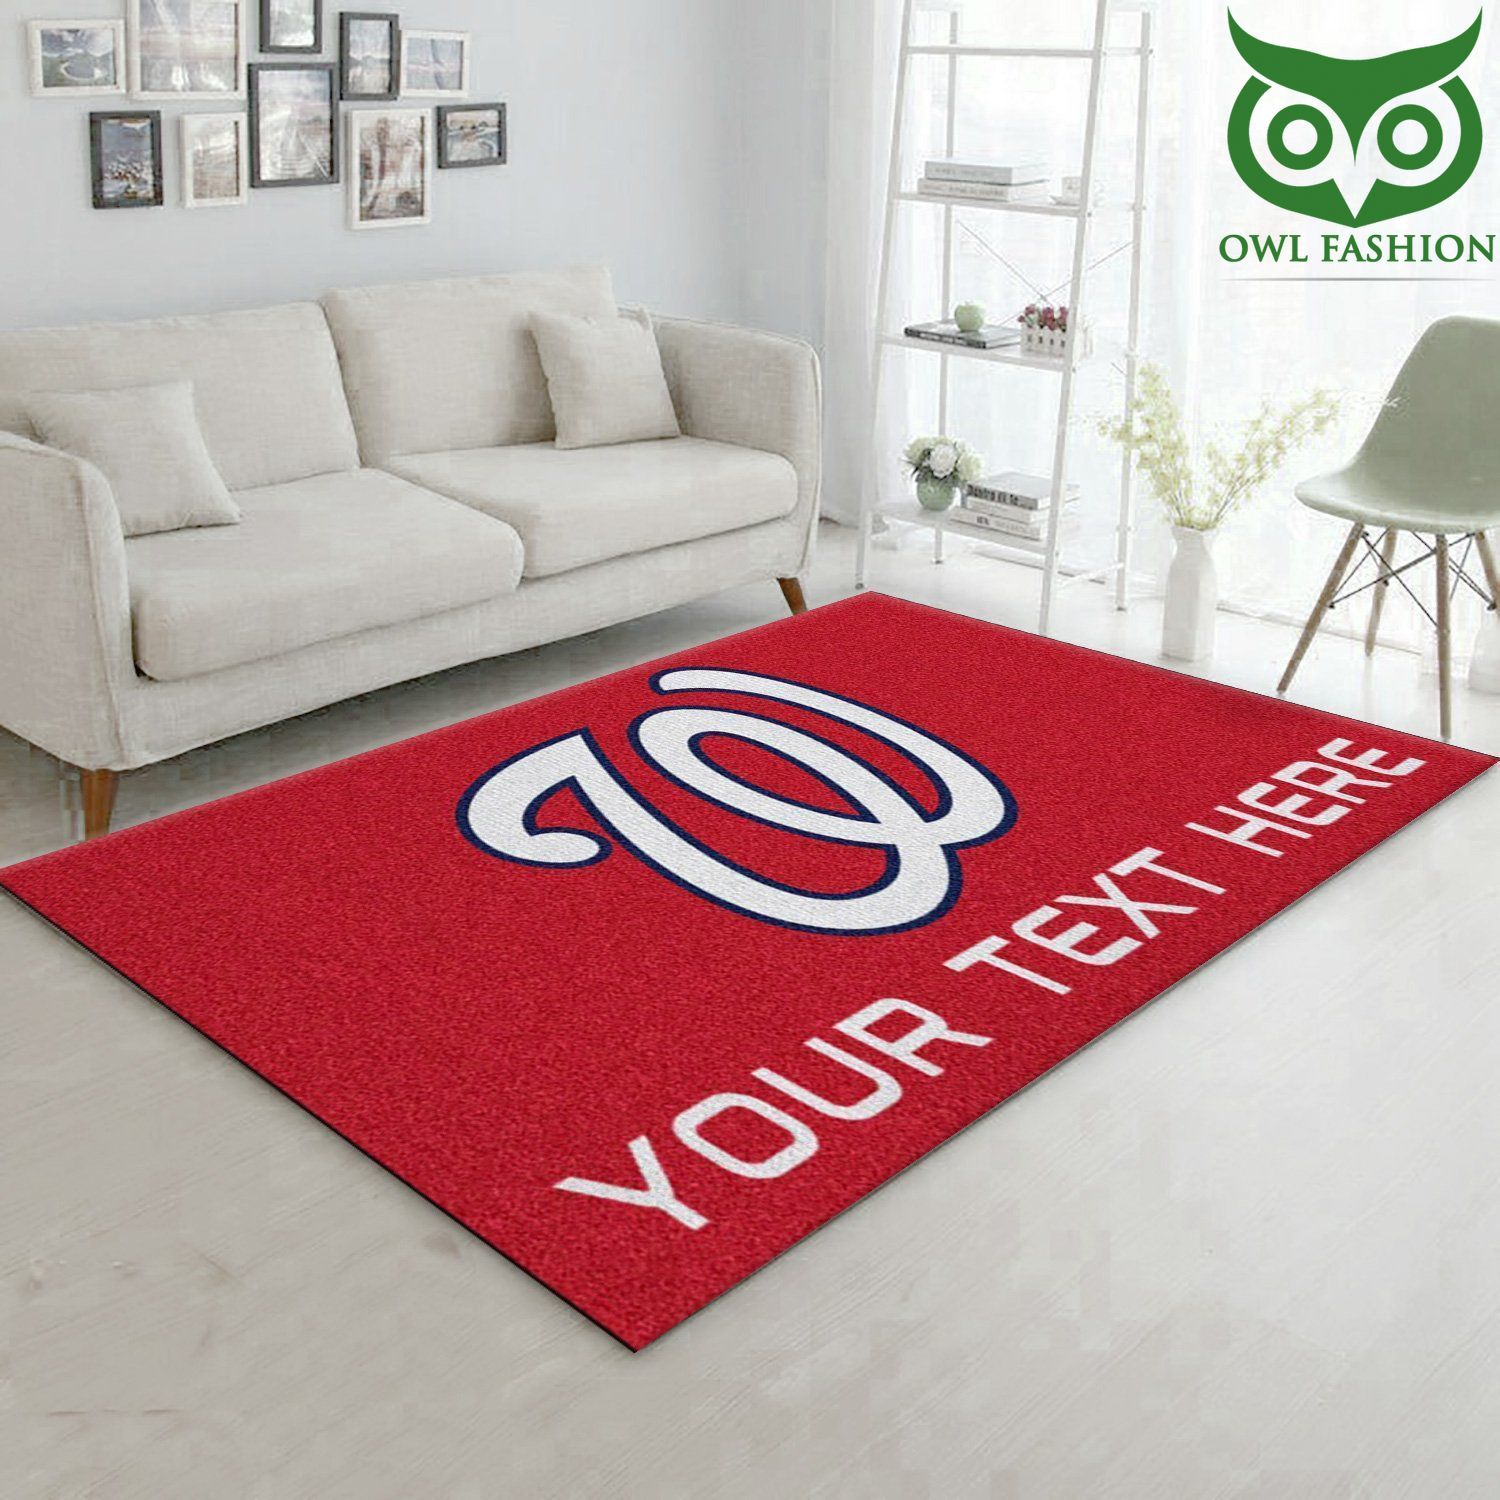 11 Customizable Personalized Accent MLB Carpet Rug